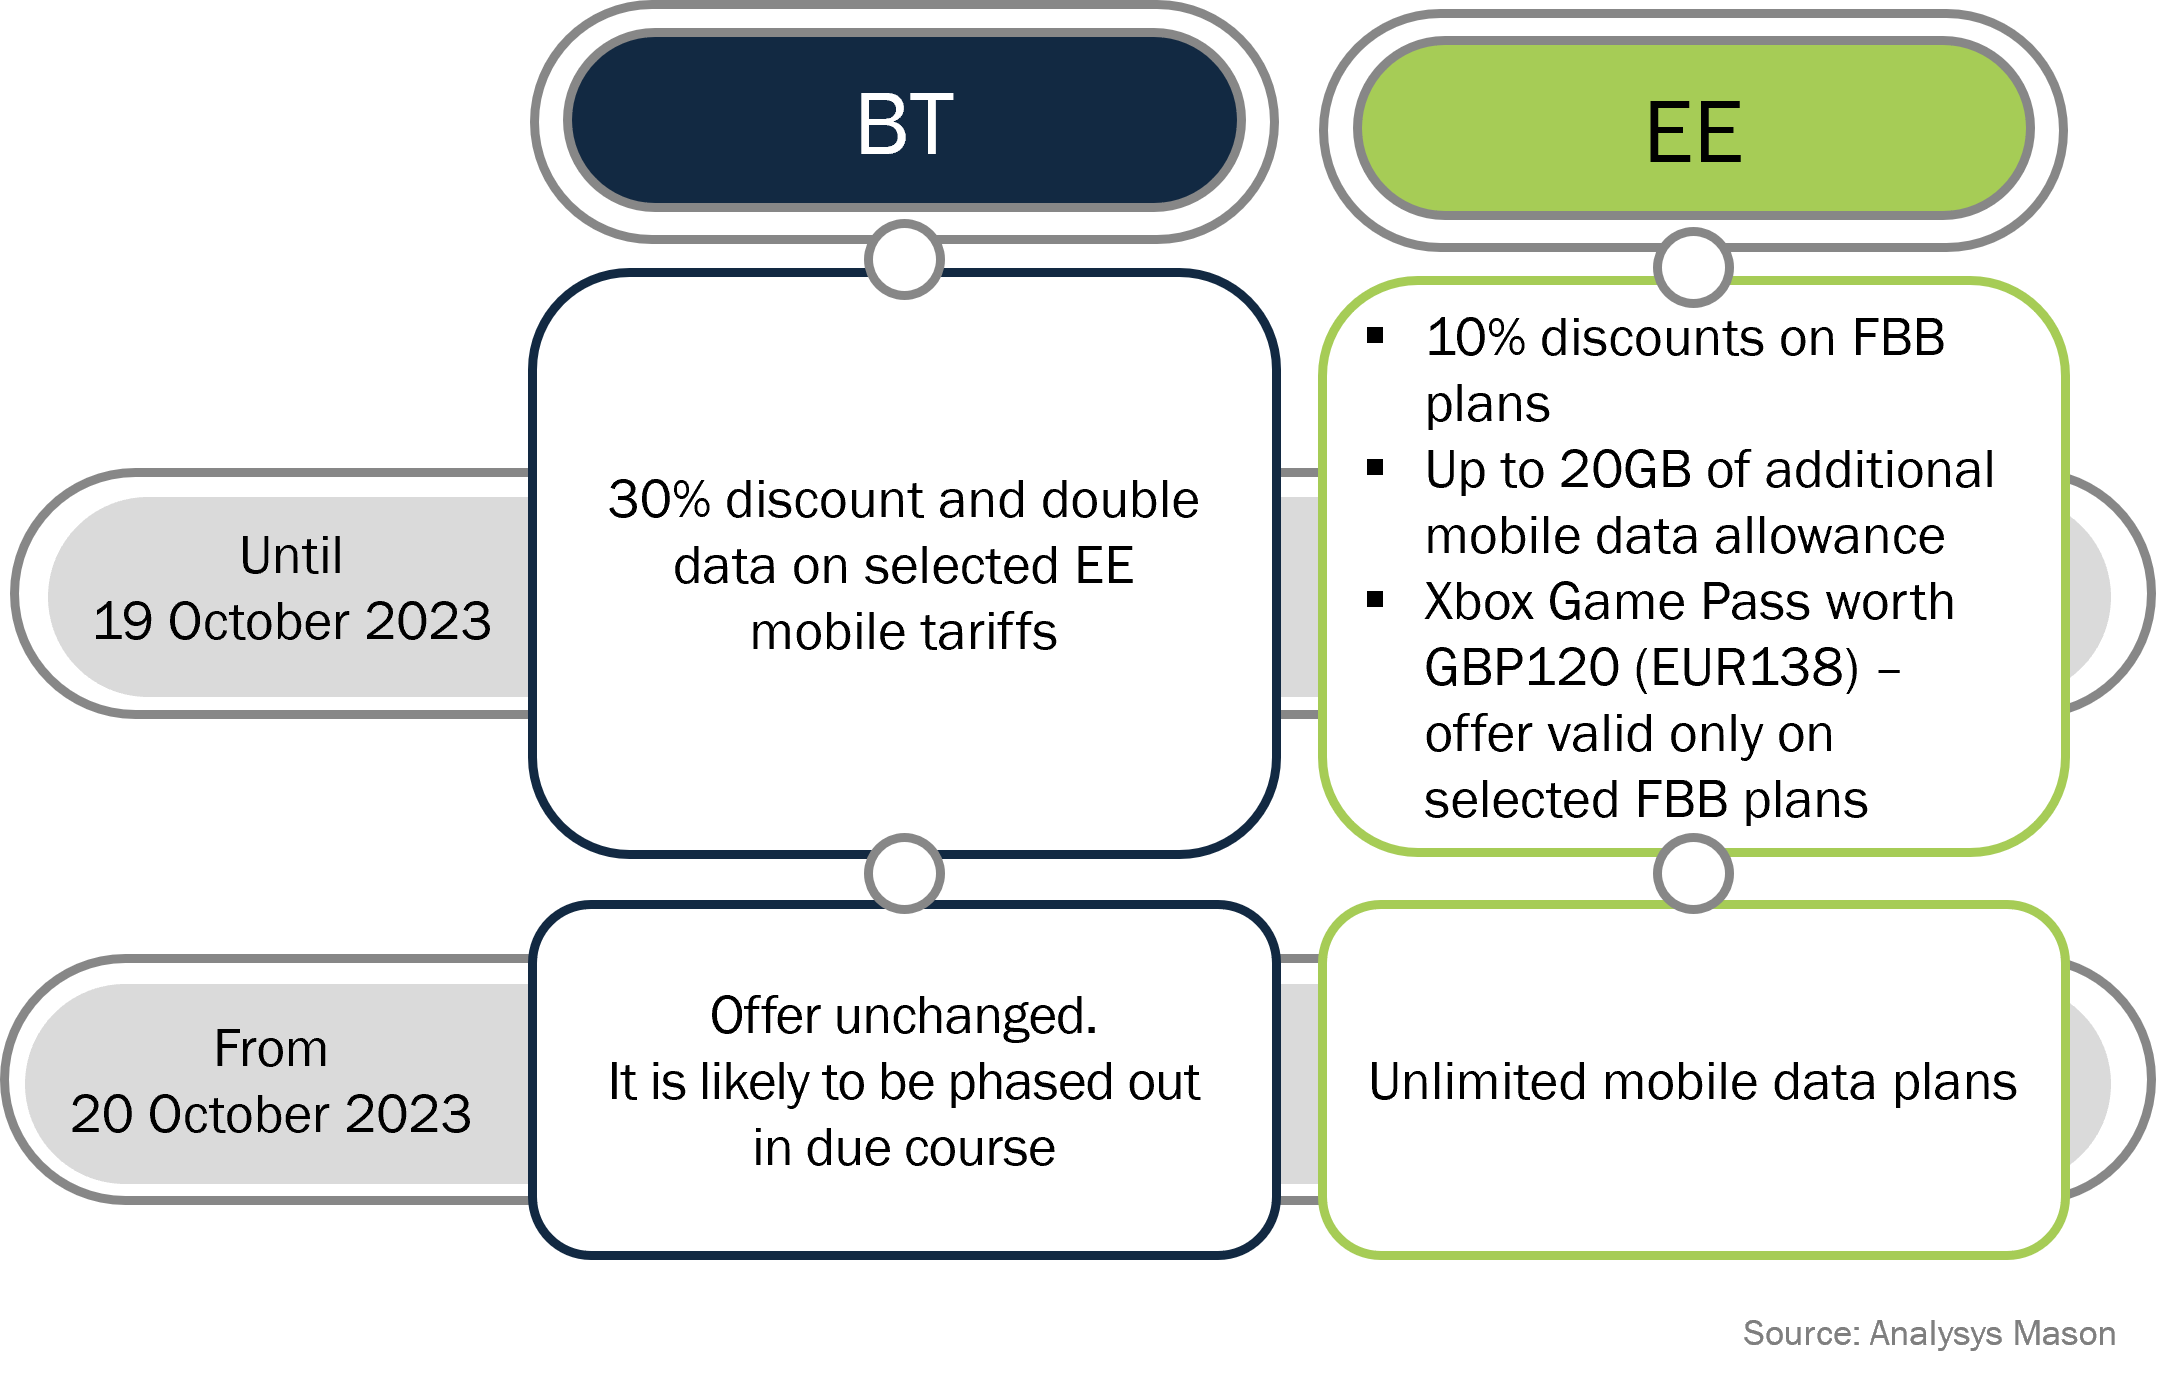 Figure 1: Benefits granted to customers that take both fixed and mobile services, BT and EE